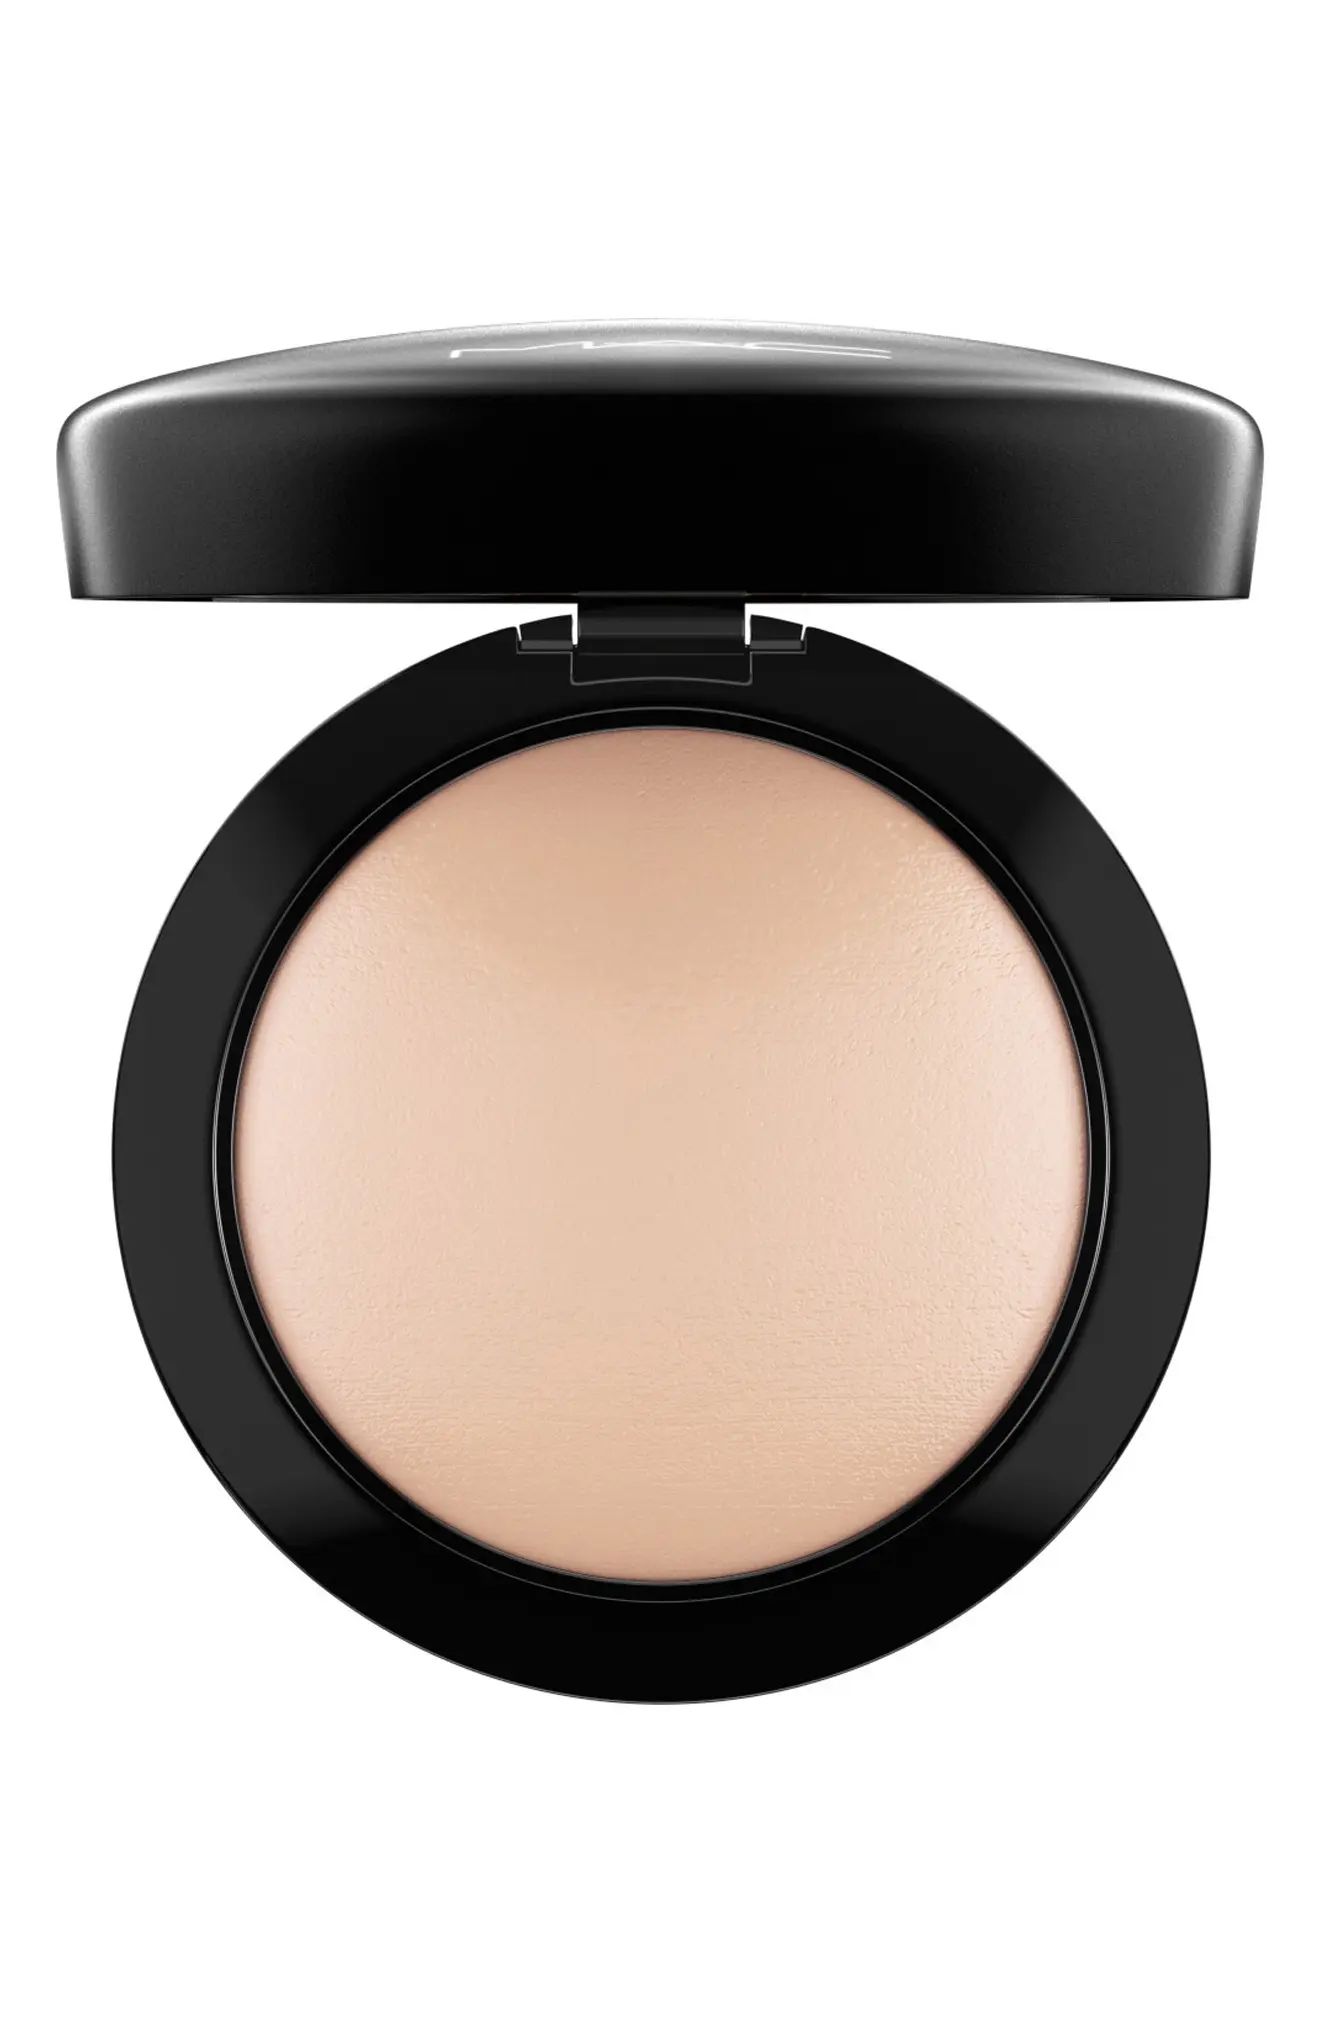 MAC Cosmetics MAC Mineralize Skinfinish Natural Face Setting Powder in Light Plus at Nordstrom | Nordstrom